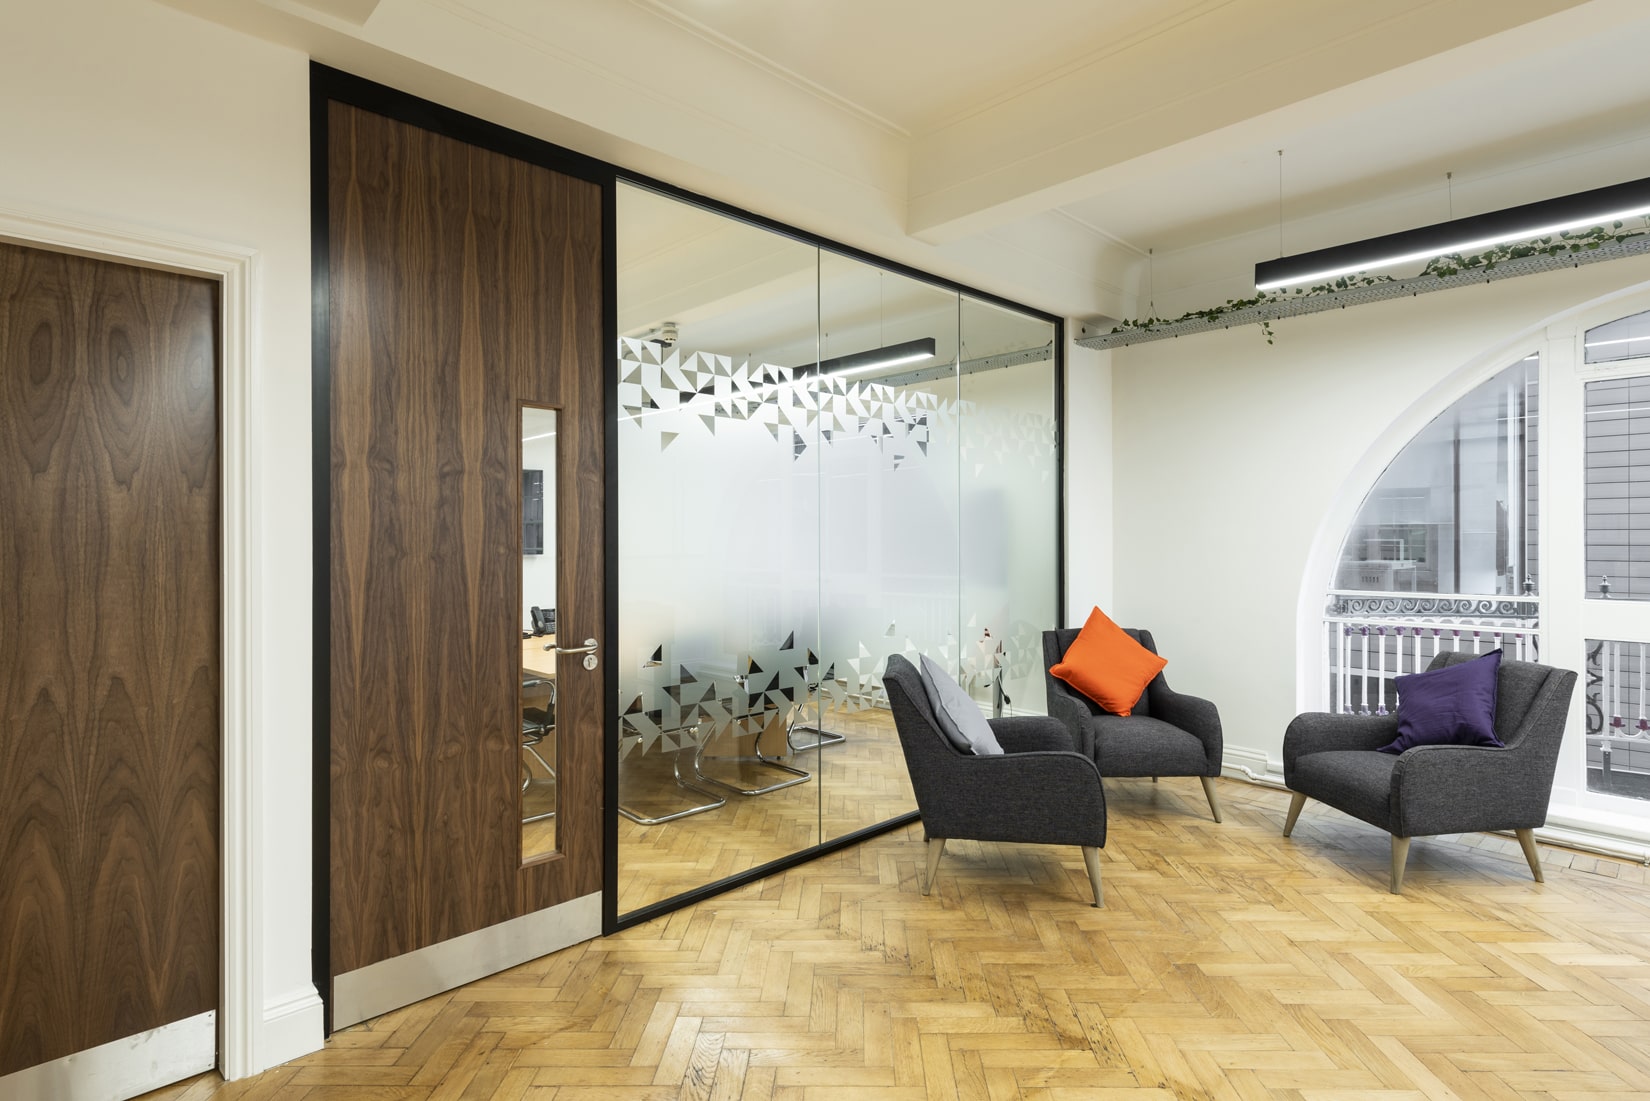 Thin glass partitioning